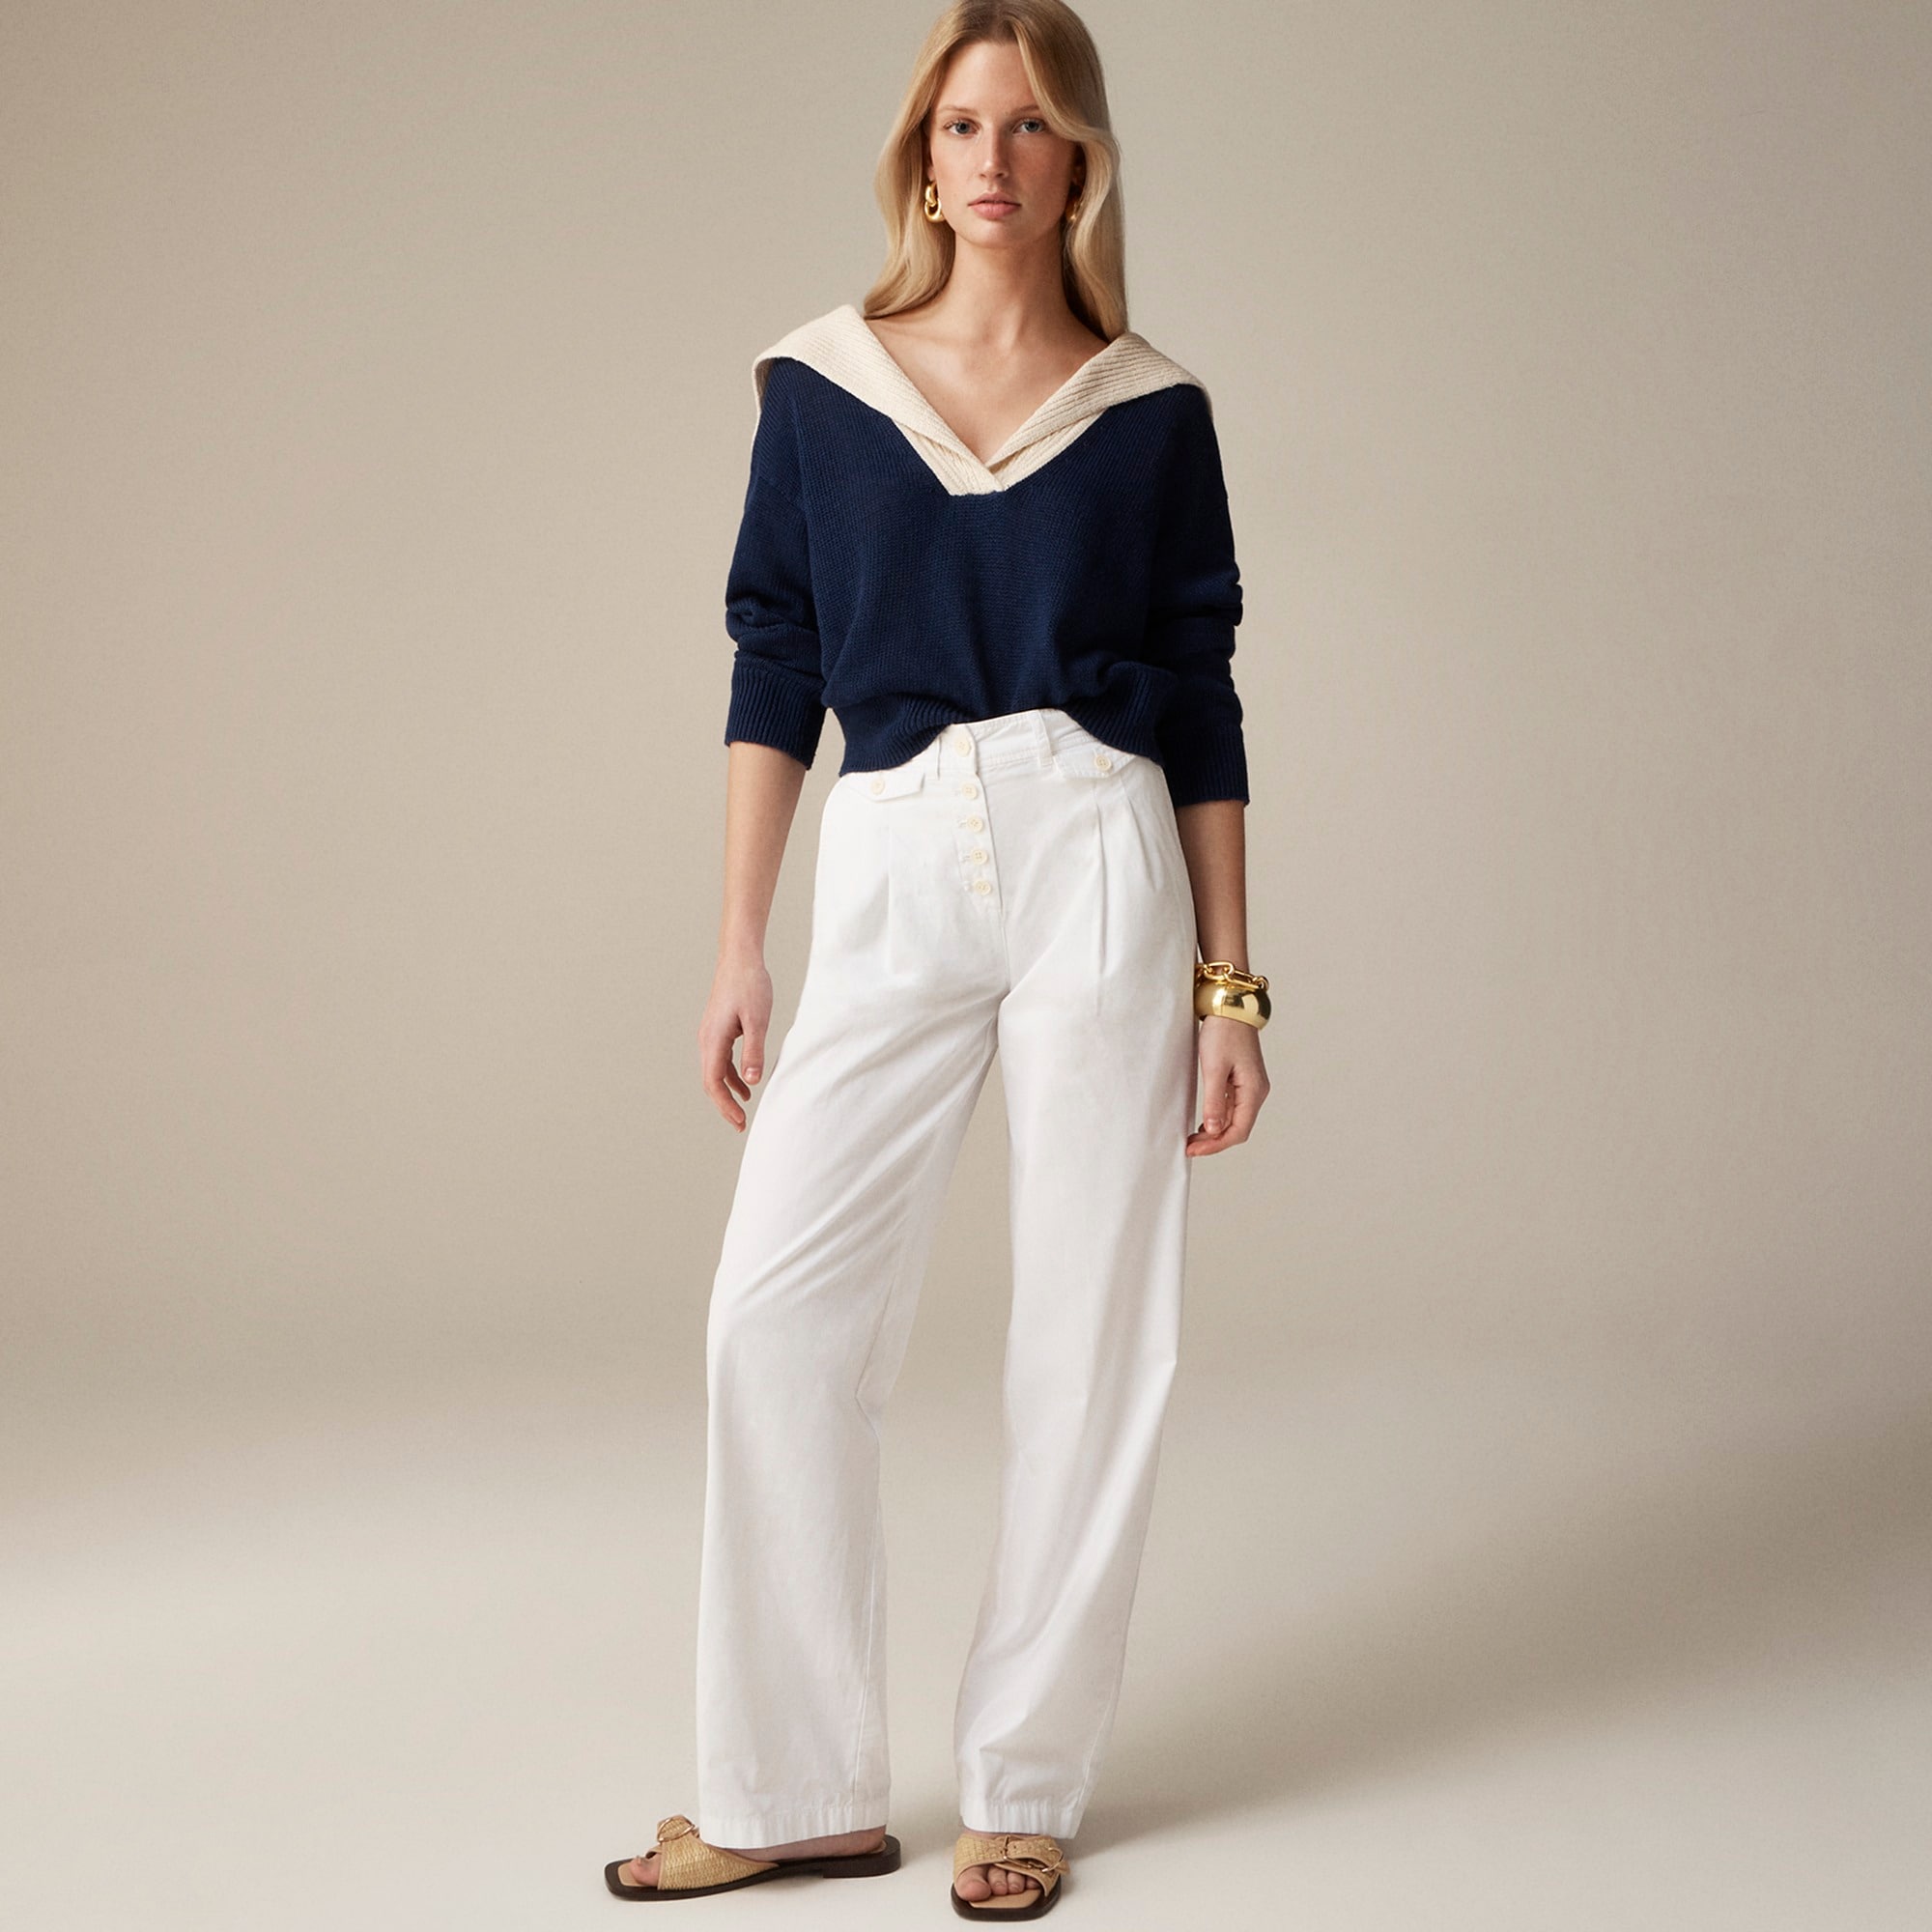 Jcrew Pleated button-front pant in chino